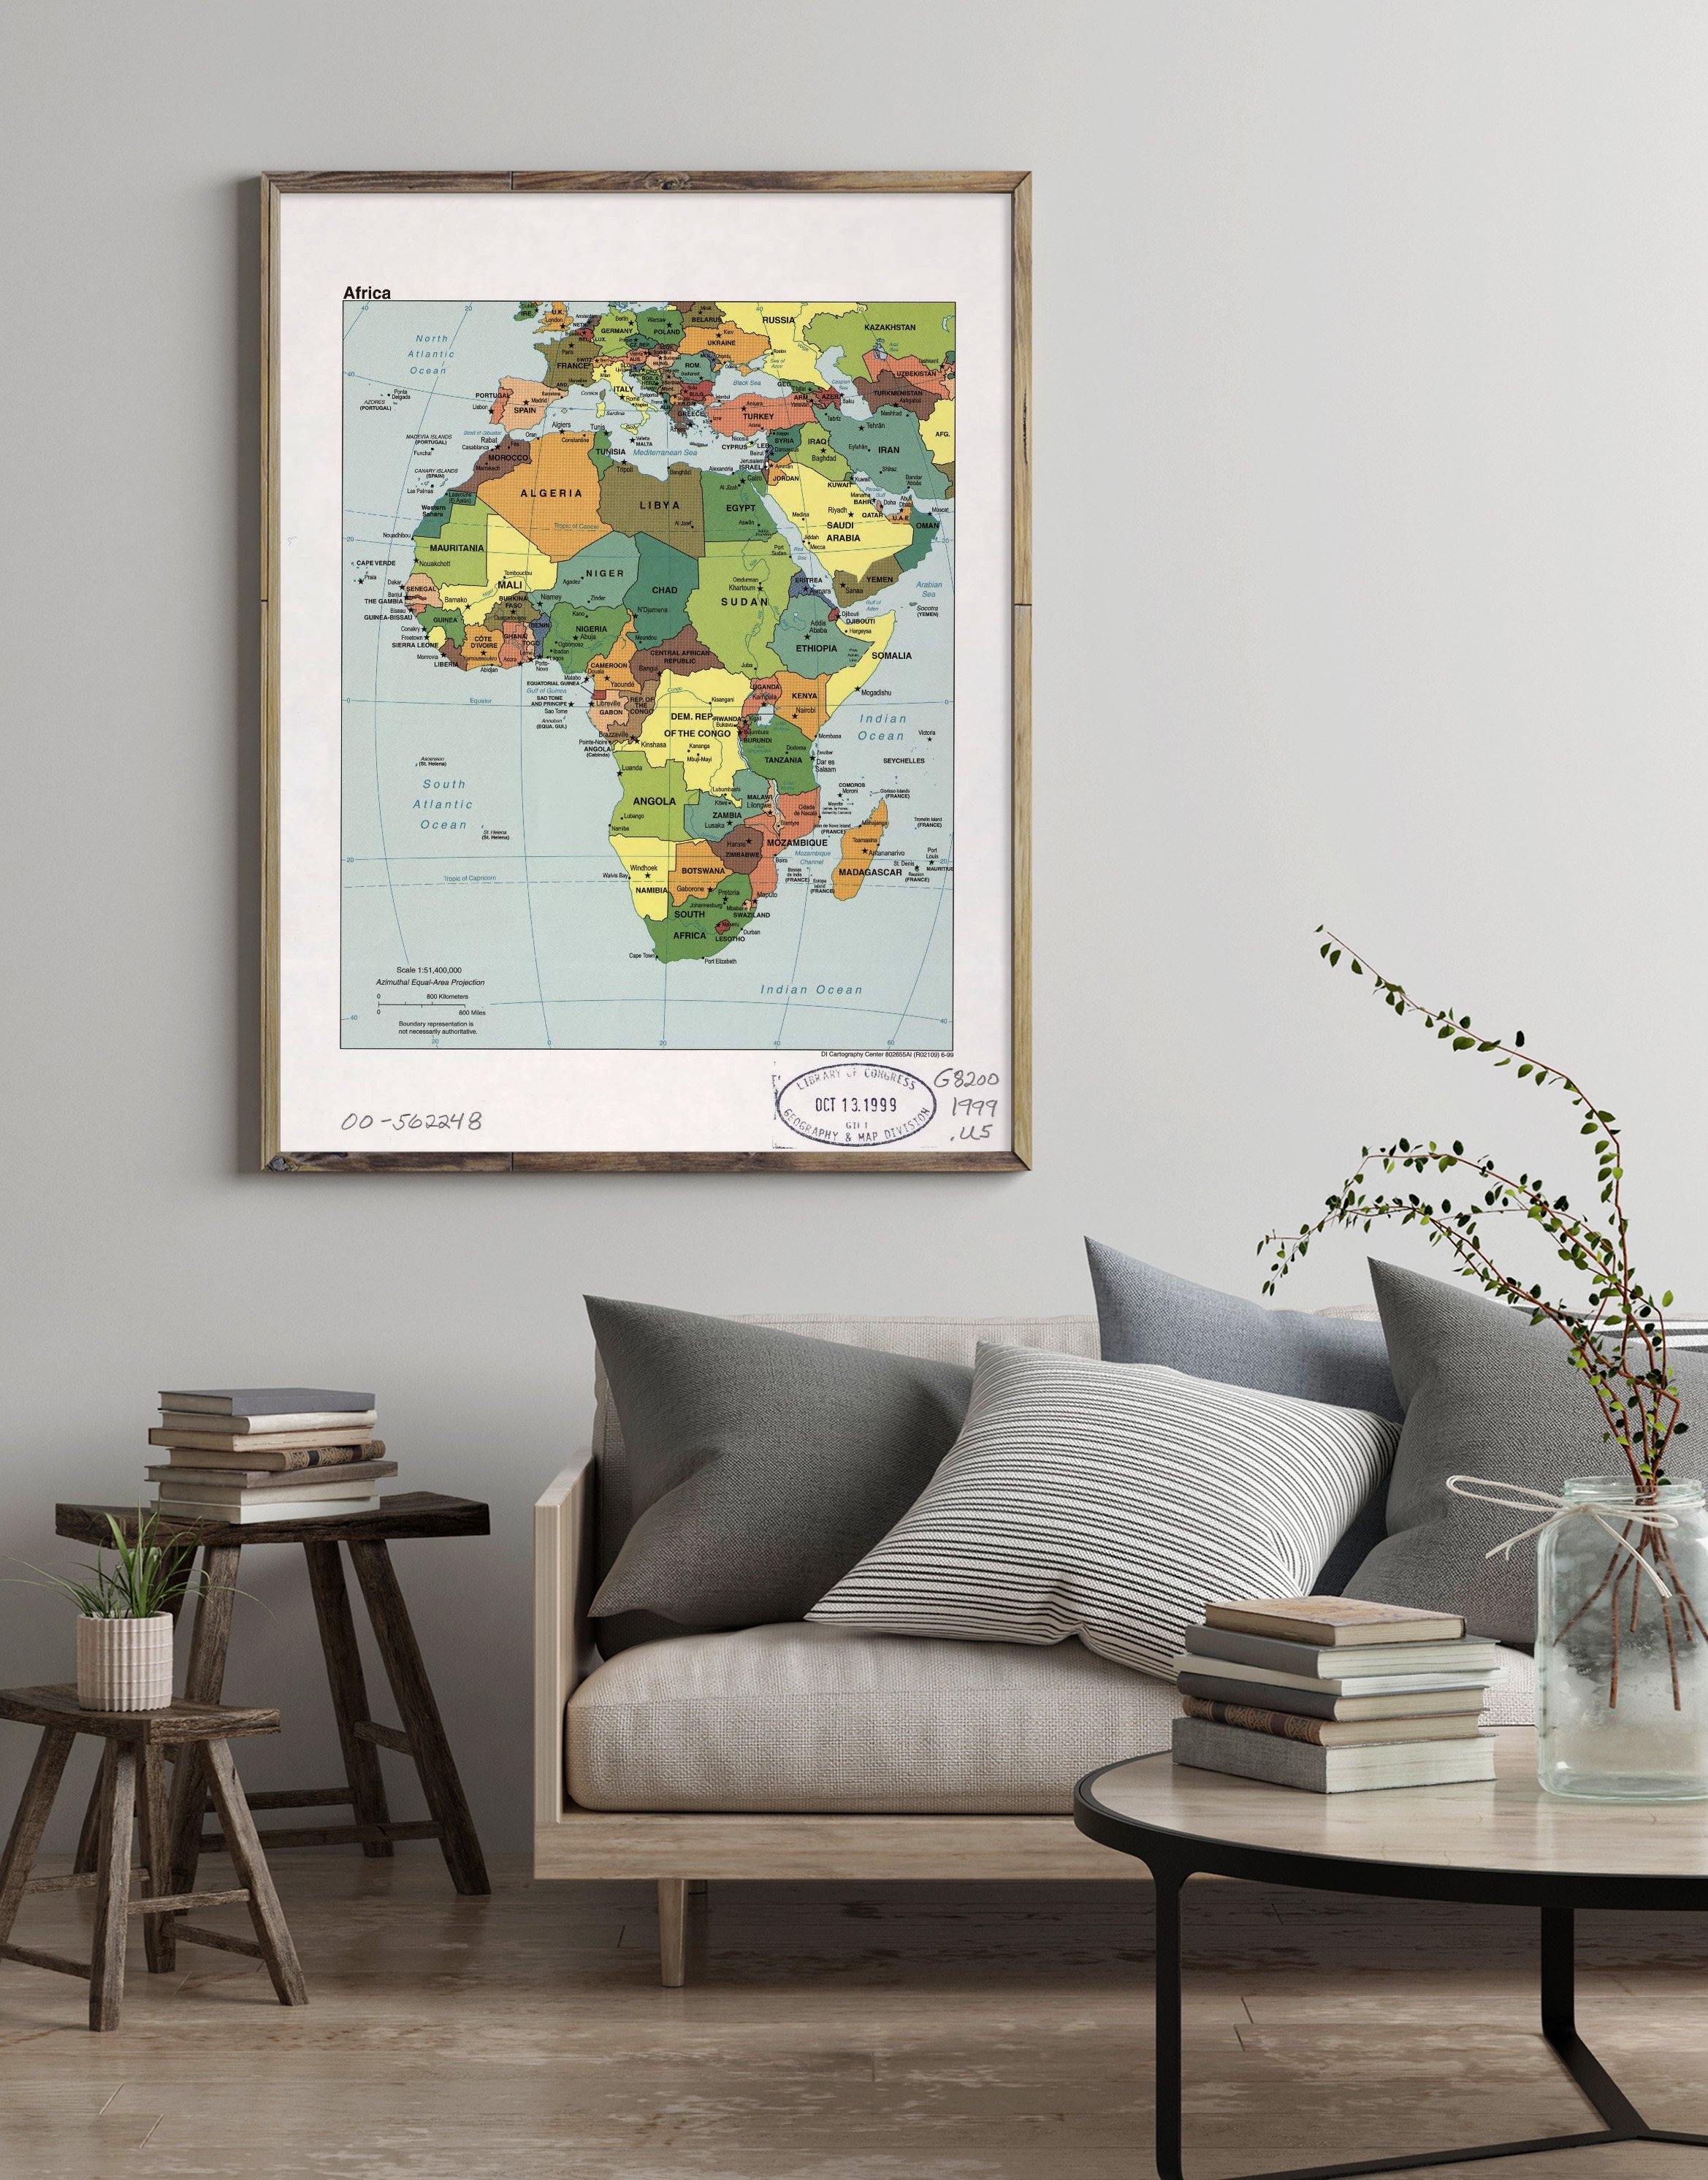 1999 Map| Africa| Africa Map Size: 18 inches x 24 inches |Fits 18x24 s - New York Map Company